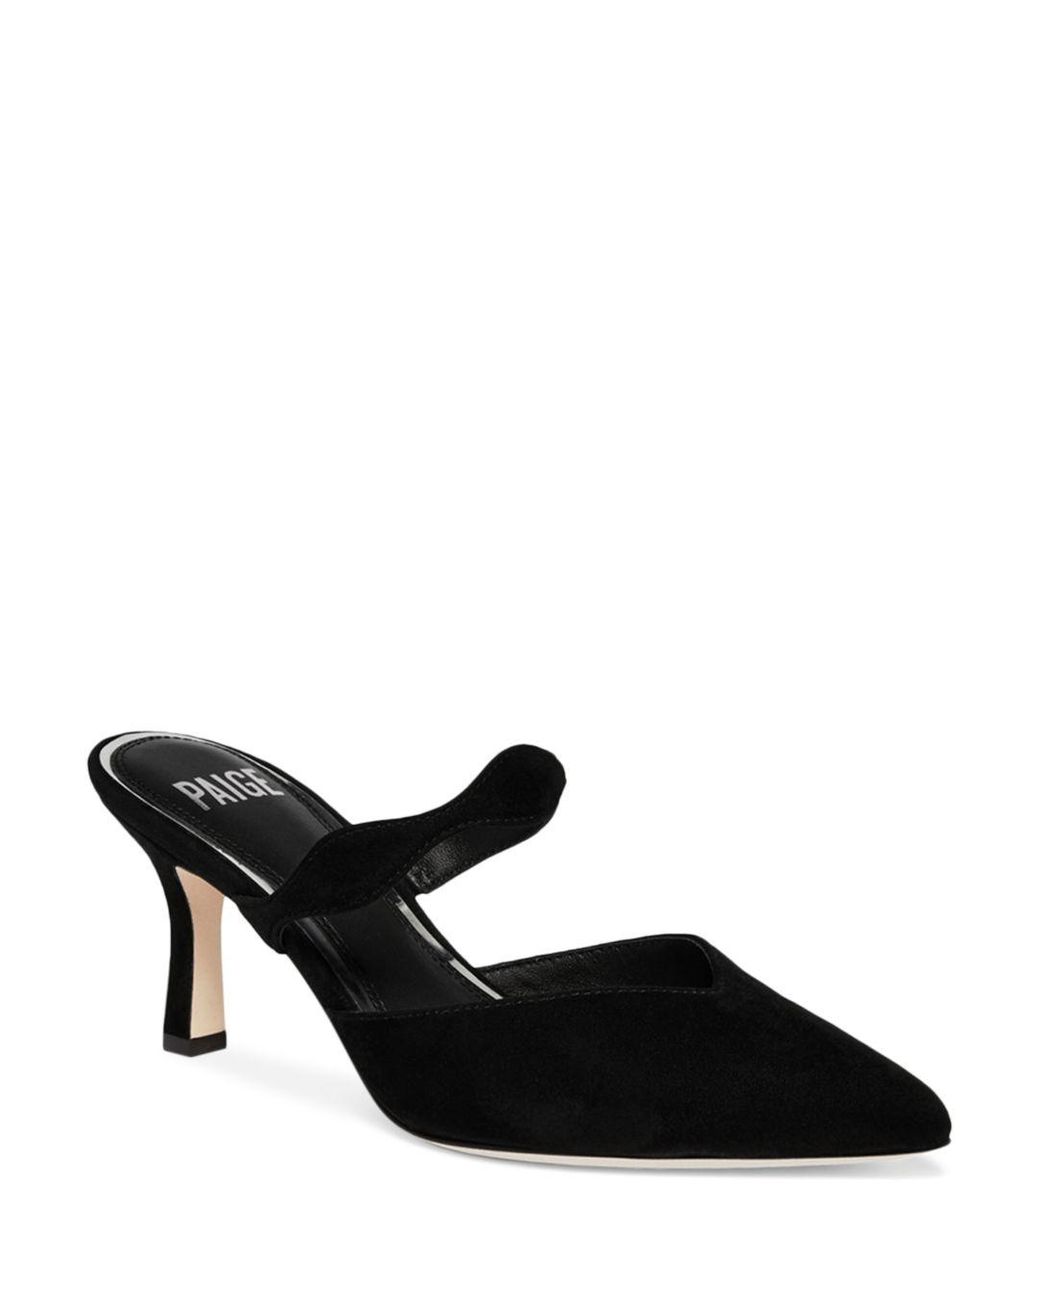 PAIGE Pia Pointed Toe Slip On High Heel Pumps in Black | Lyst